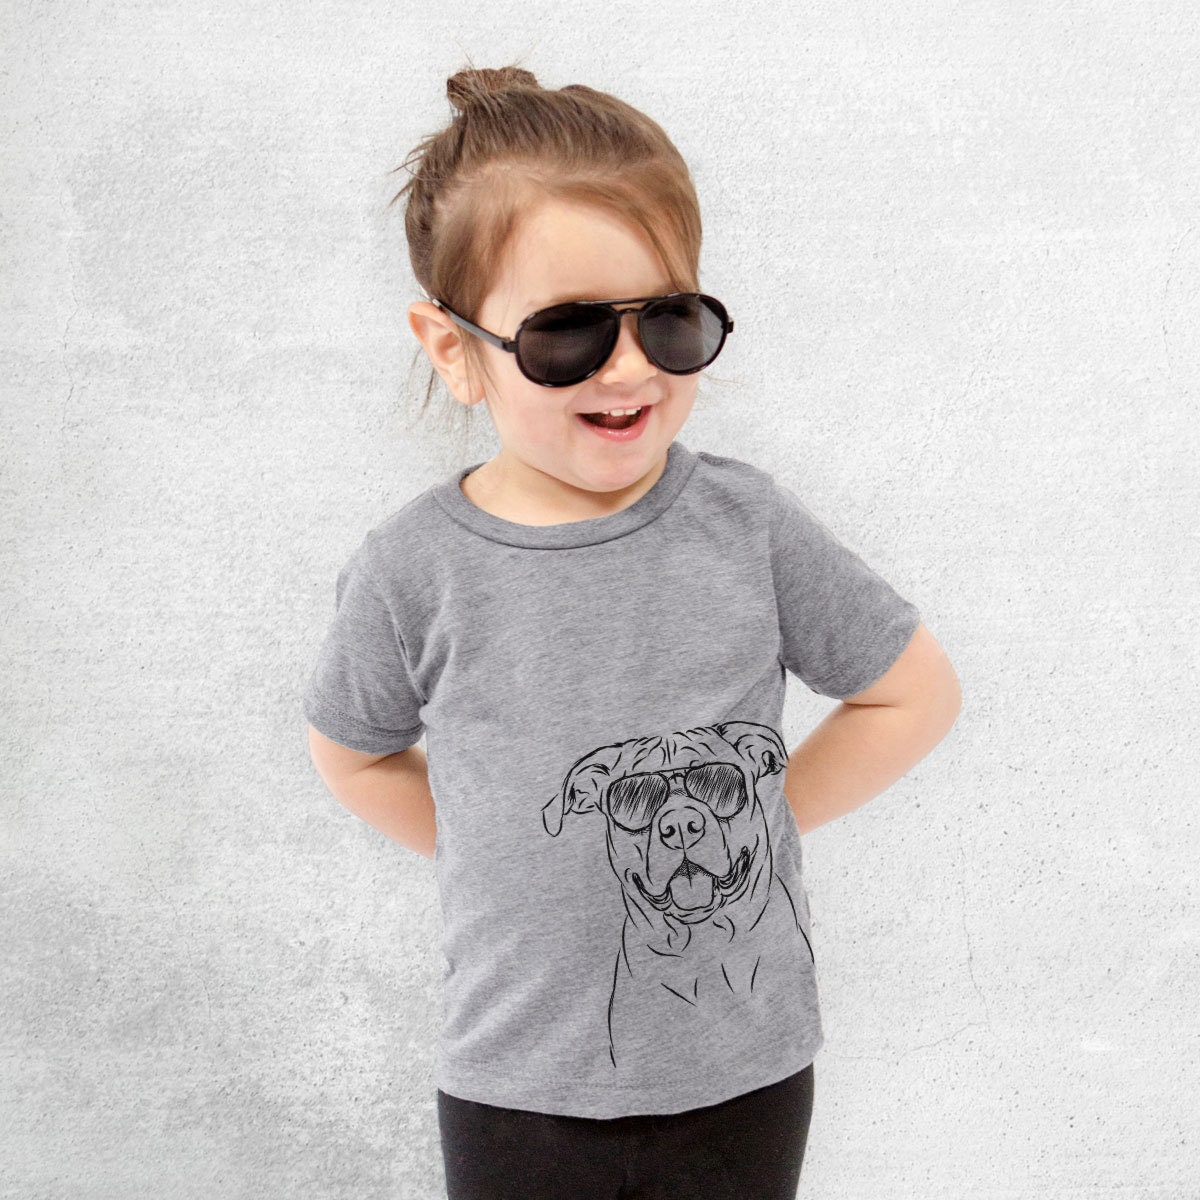 Timmy The Mixed Breed Tri-Blend Shirt - Kids Dog Tshirt Animal Glasses T Rottweiler/Boxer Mix